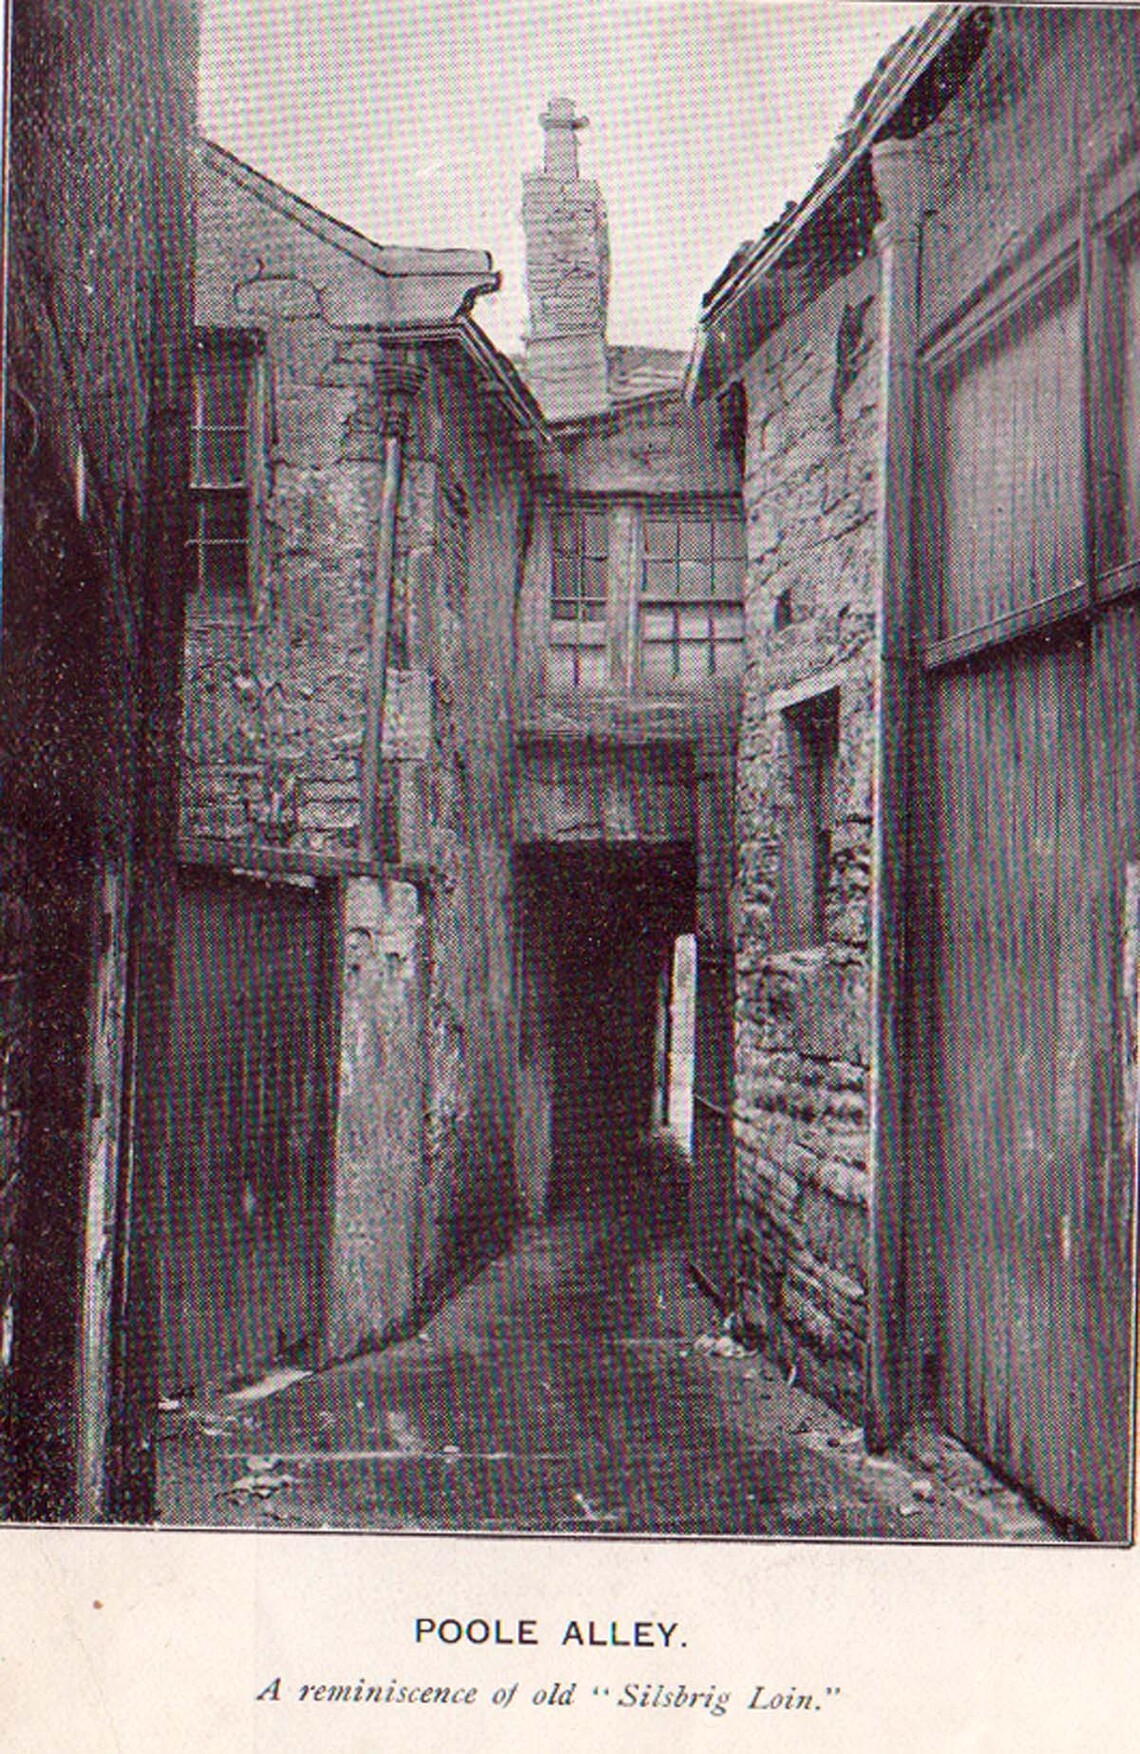 Poole Alley